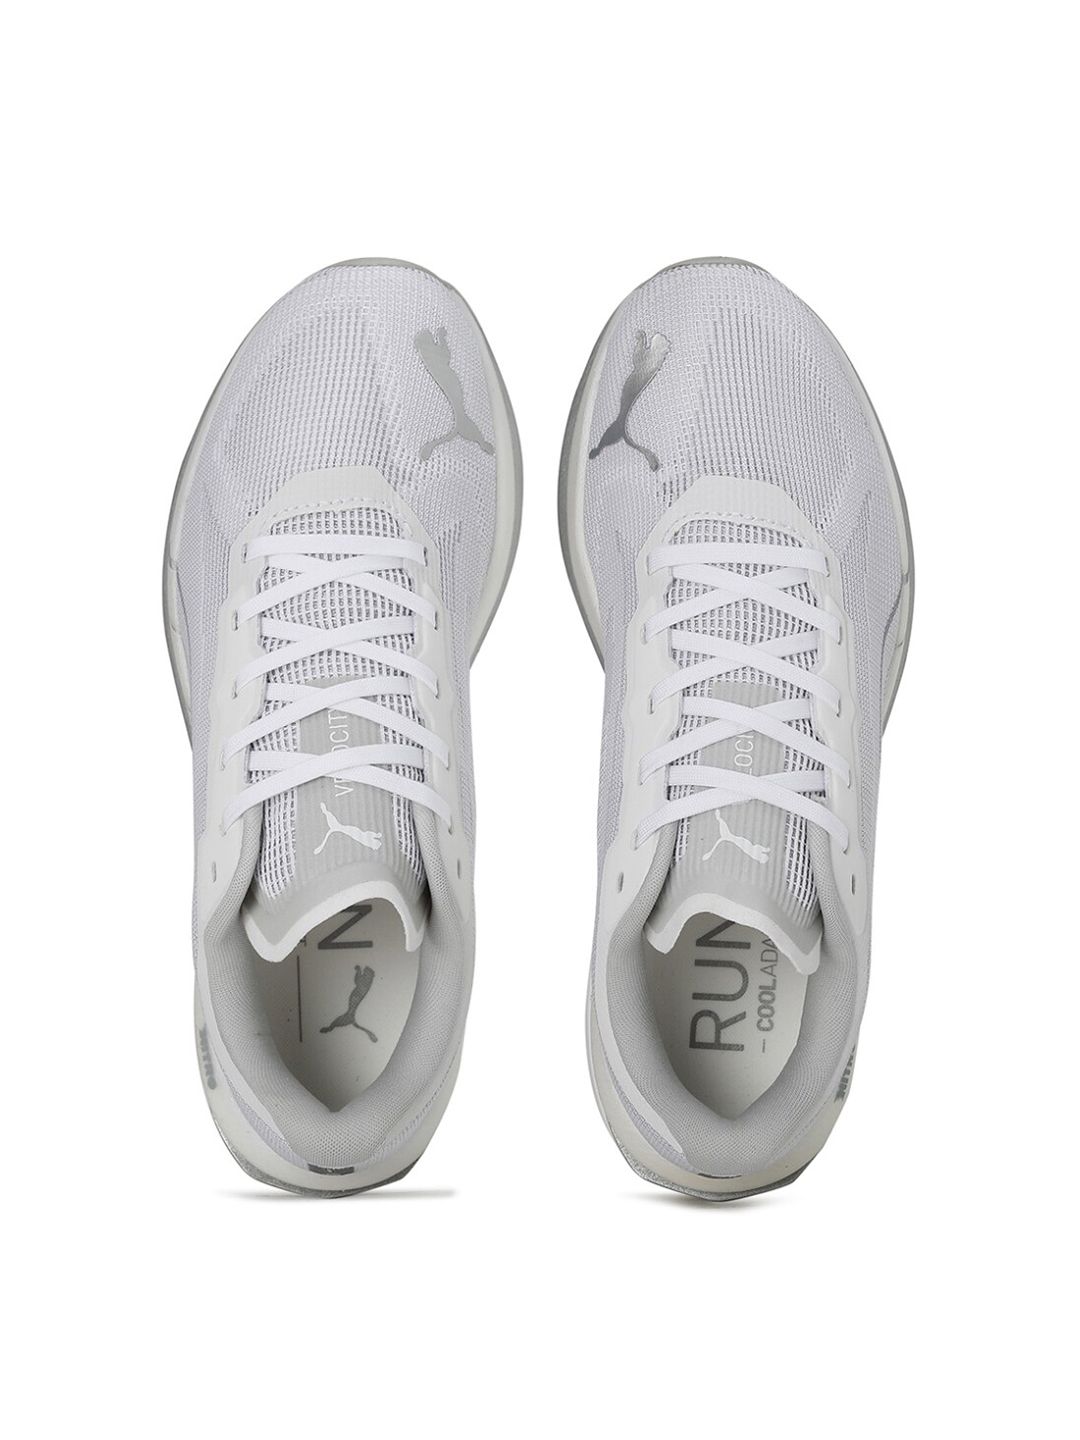 Puma Women Grey Sports Shoes Price in India